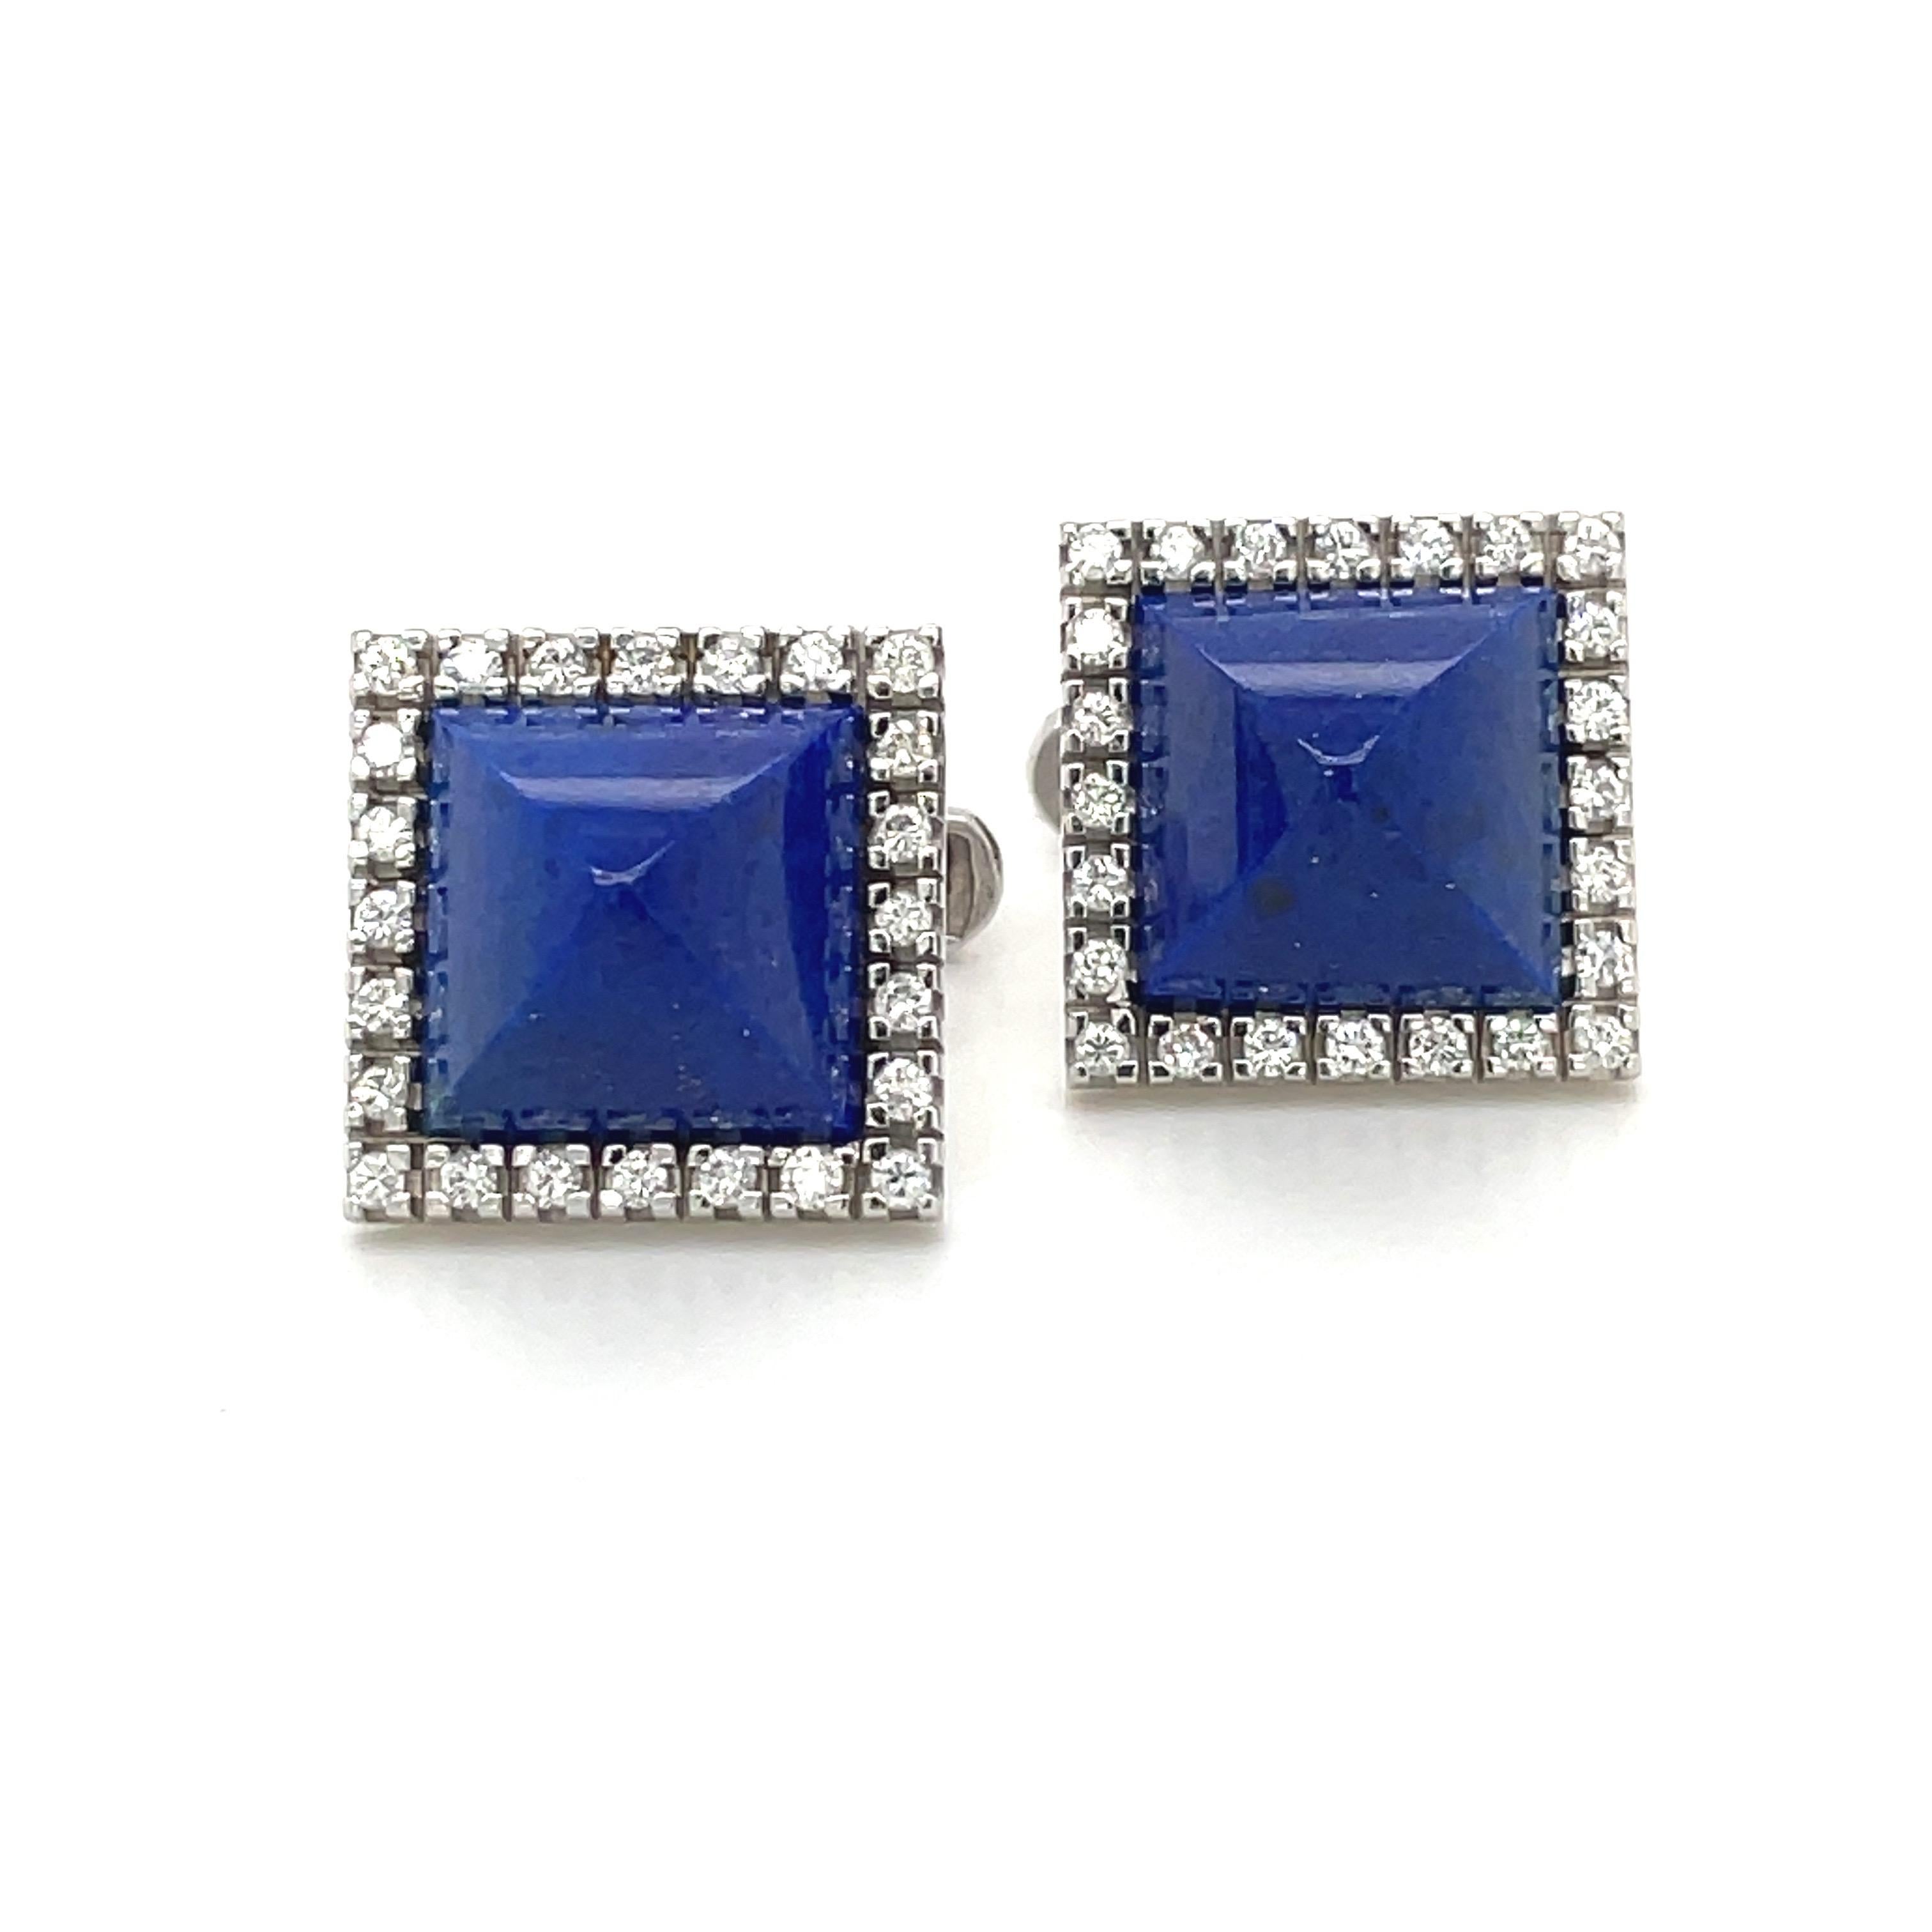 Women's or Men's 14kt White Gold Diamond 0.96ct & Sugar Loaf Lapis Lazuli Cuff Links For Sale